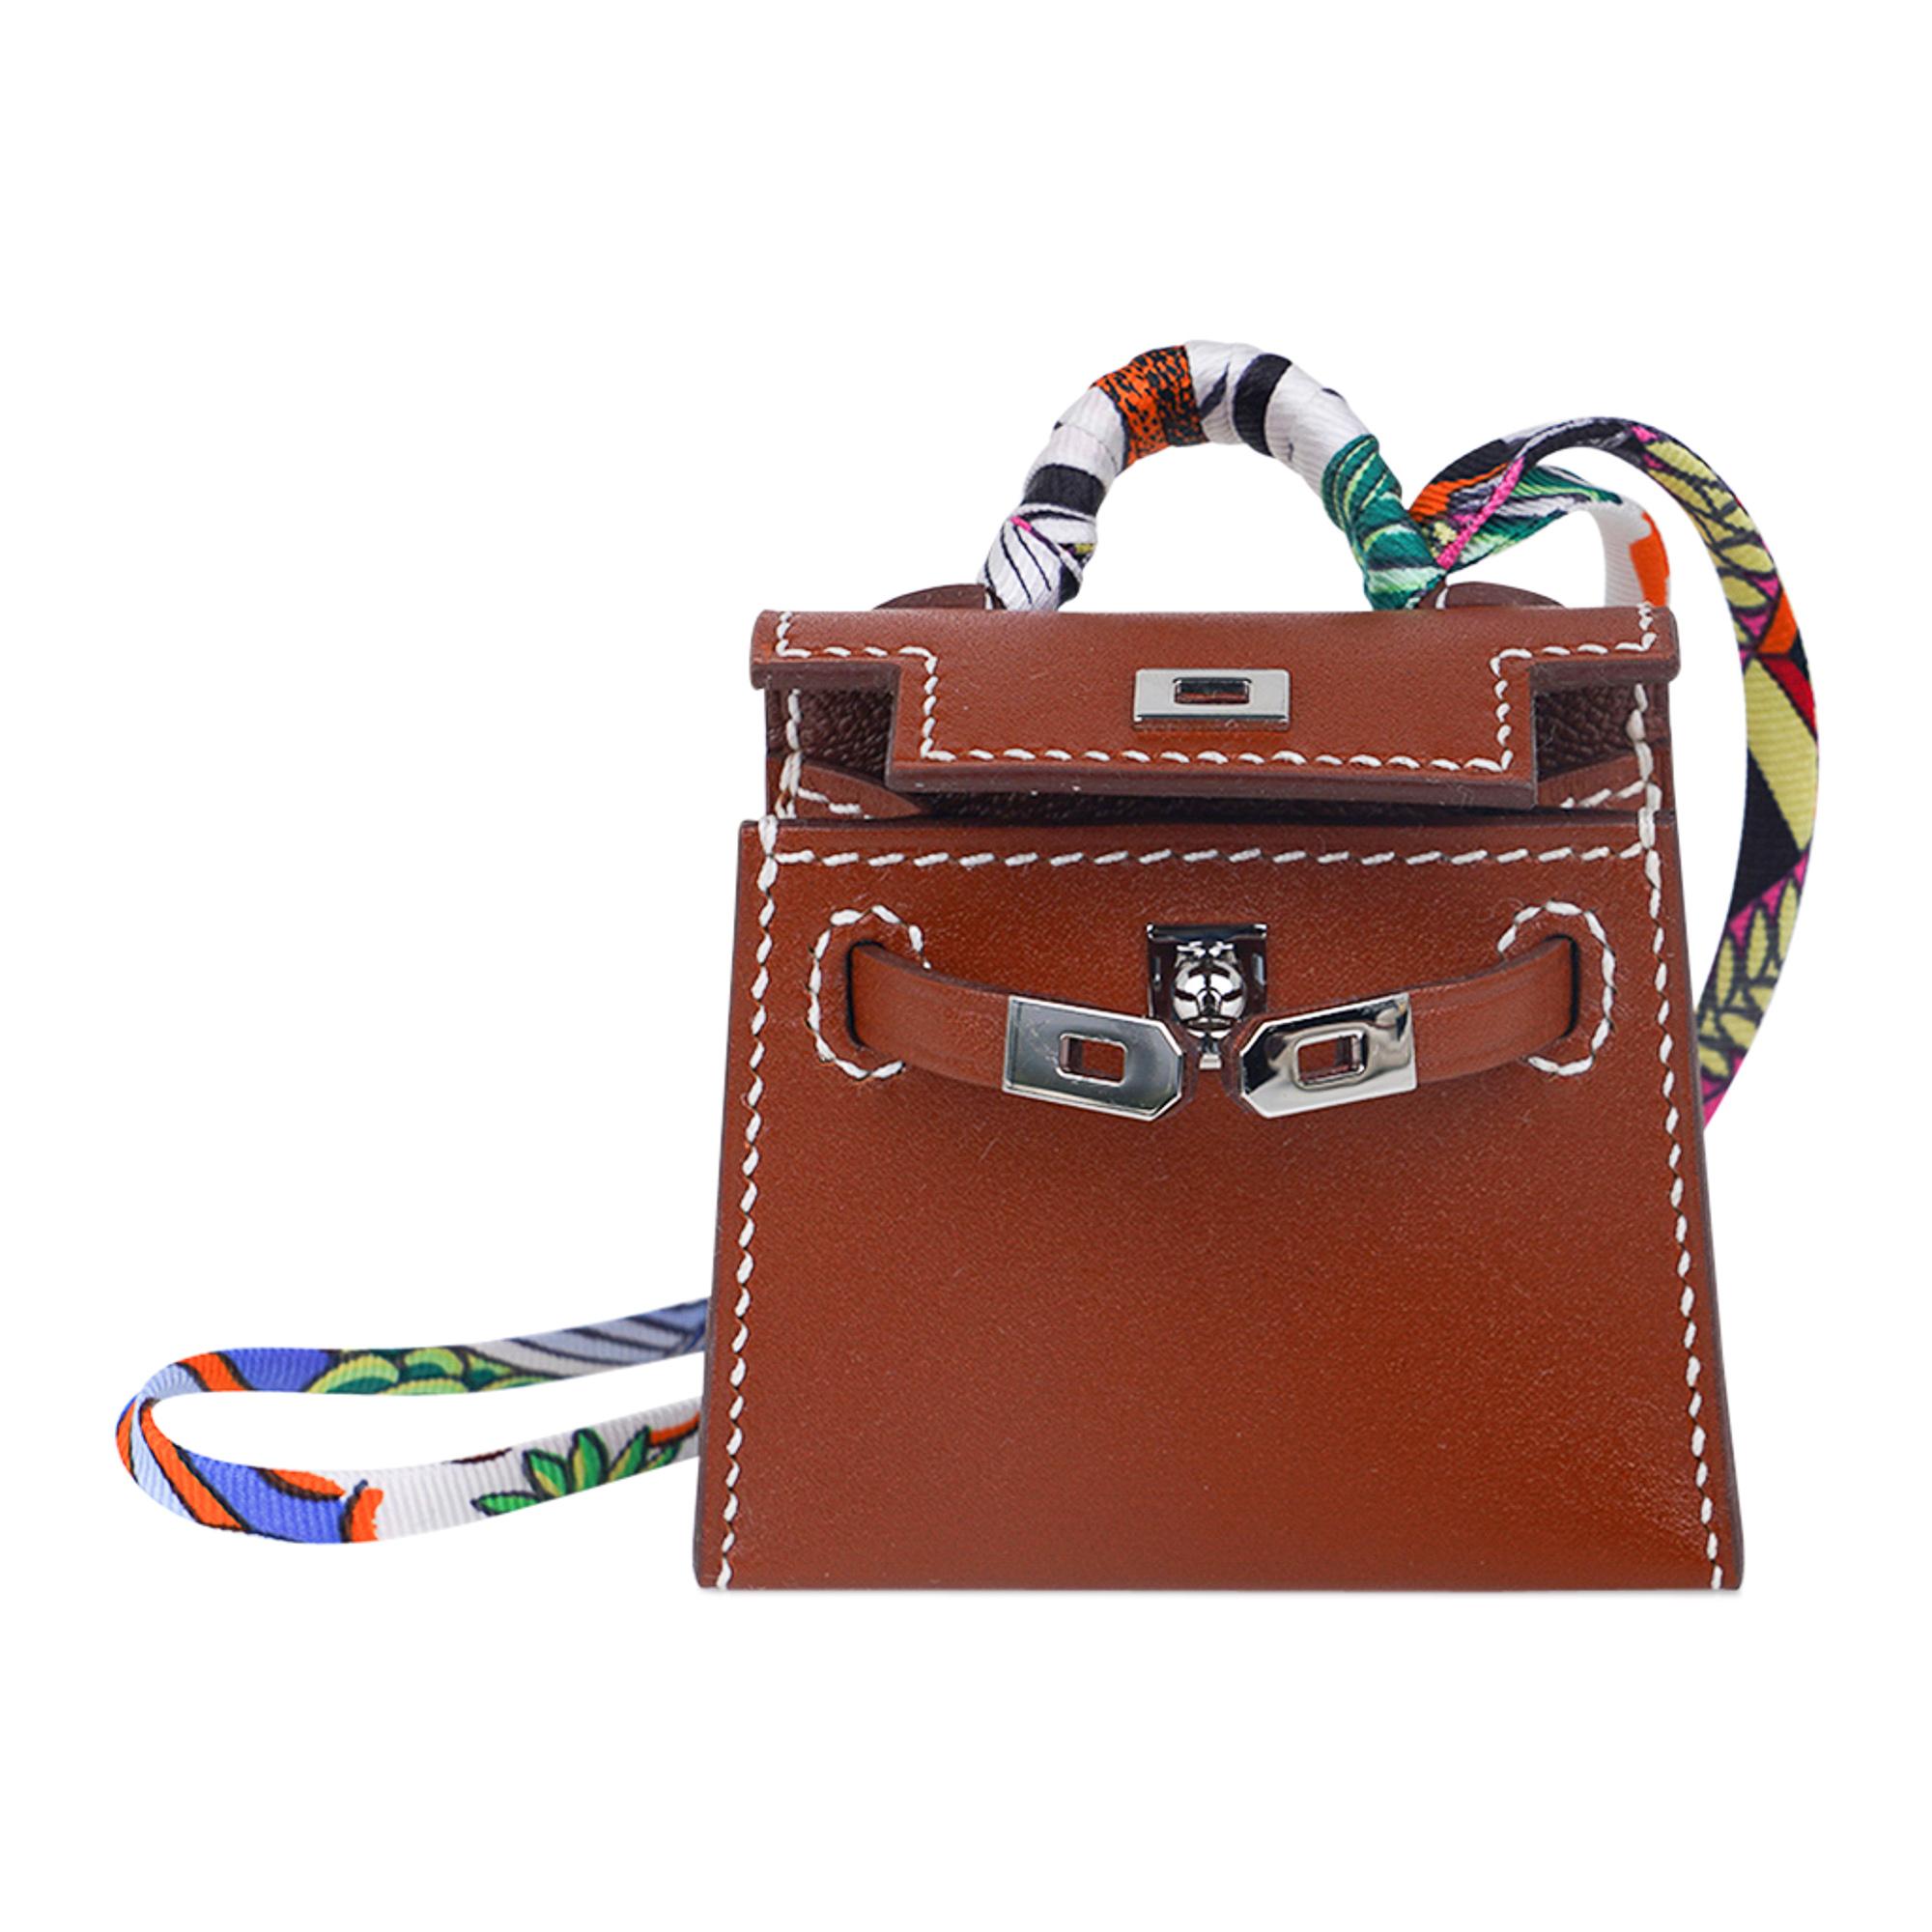 Hermes Kelly Twilly Bag Charm Fauve w/ Palladium Tadelakt Leather New w/Box In New Condition For Sale In Miami, FL